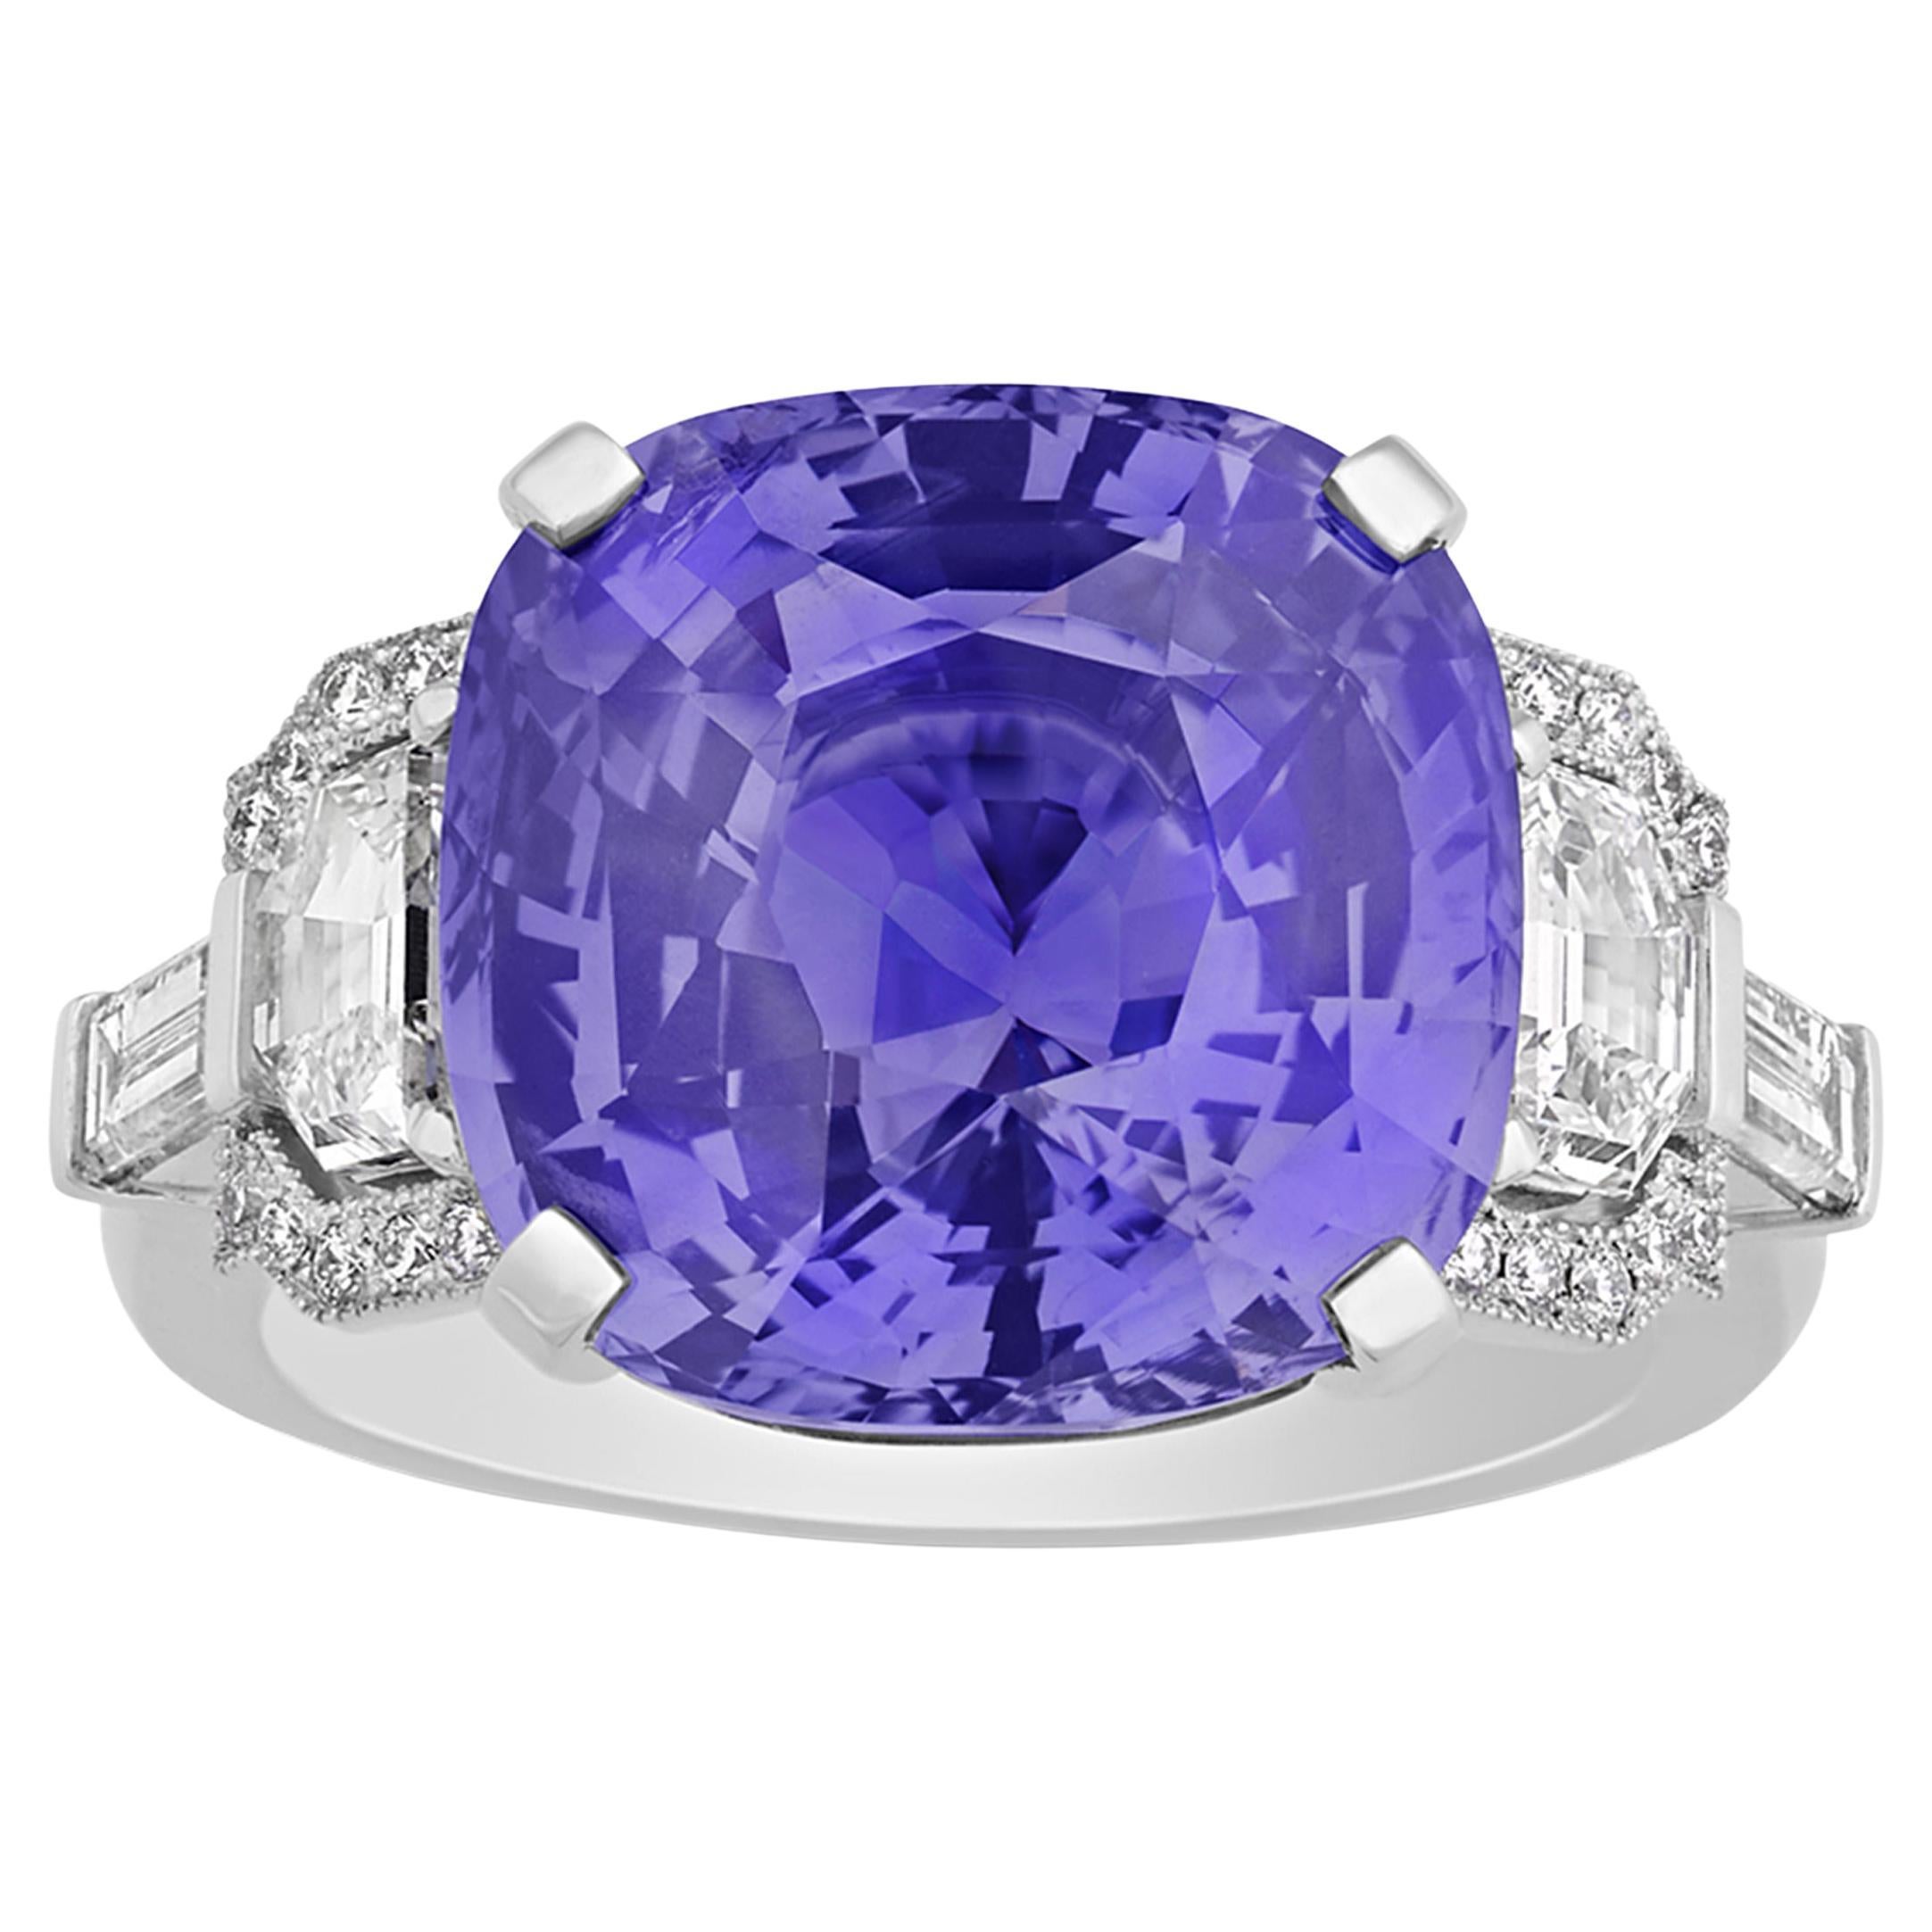 Violet Sapphire Ring by Raymond Yard, 11.02 Carats